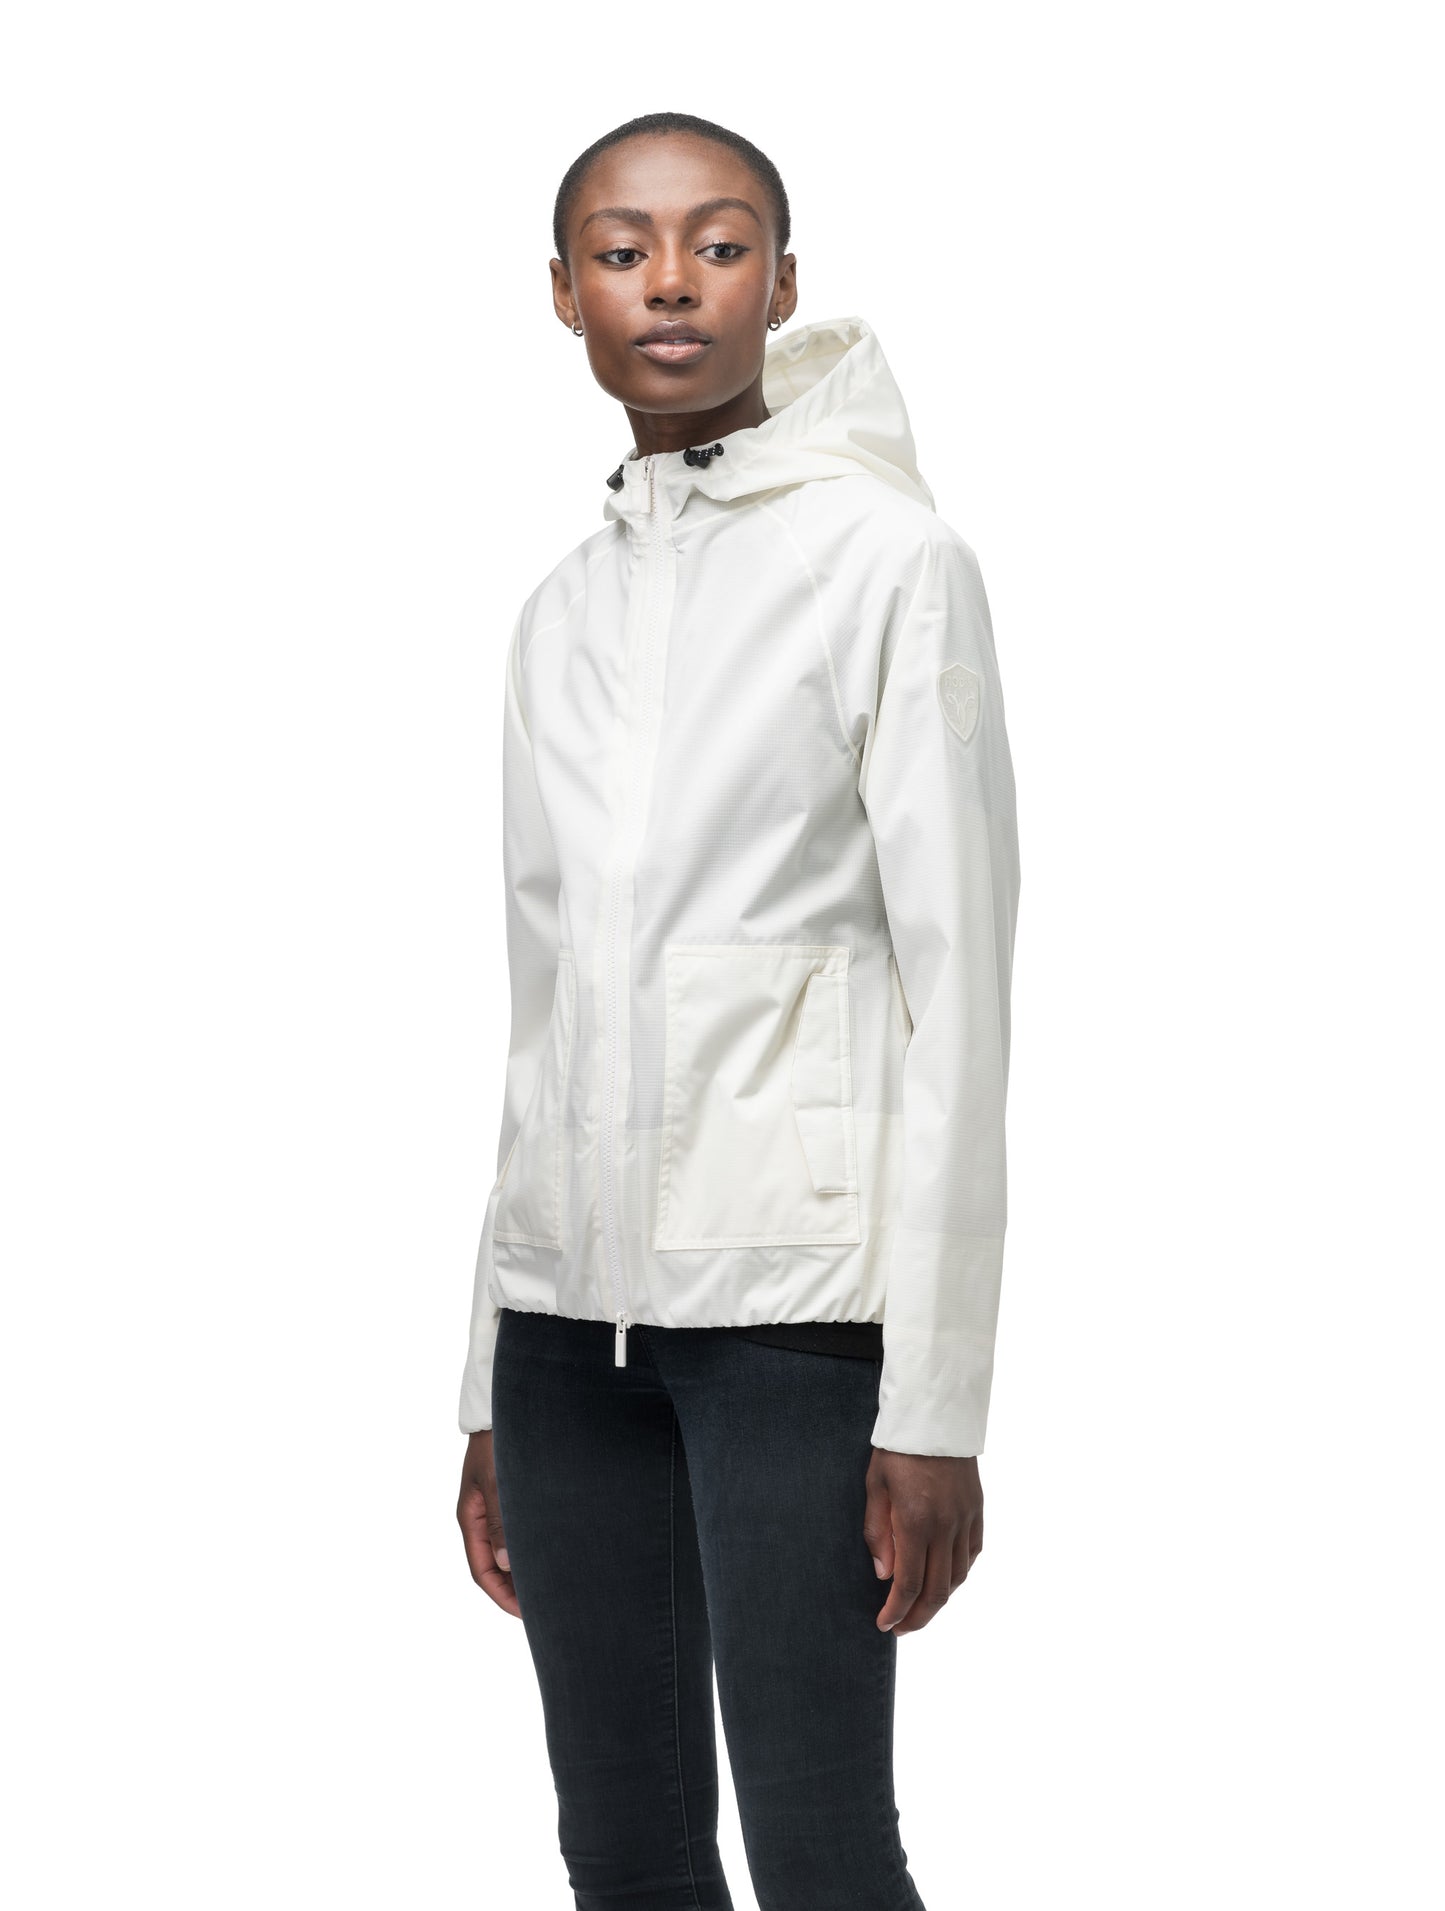 Women's hip length waterproof jacket with non-removable hood and two-way zipper in Chalk